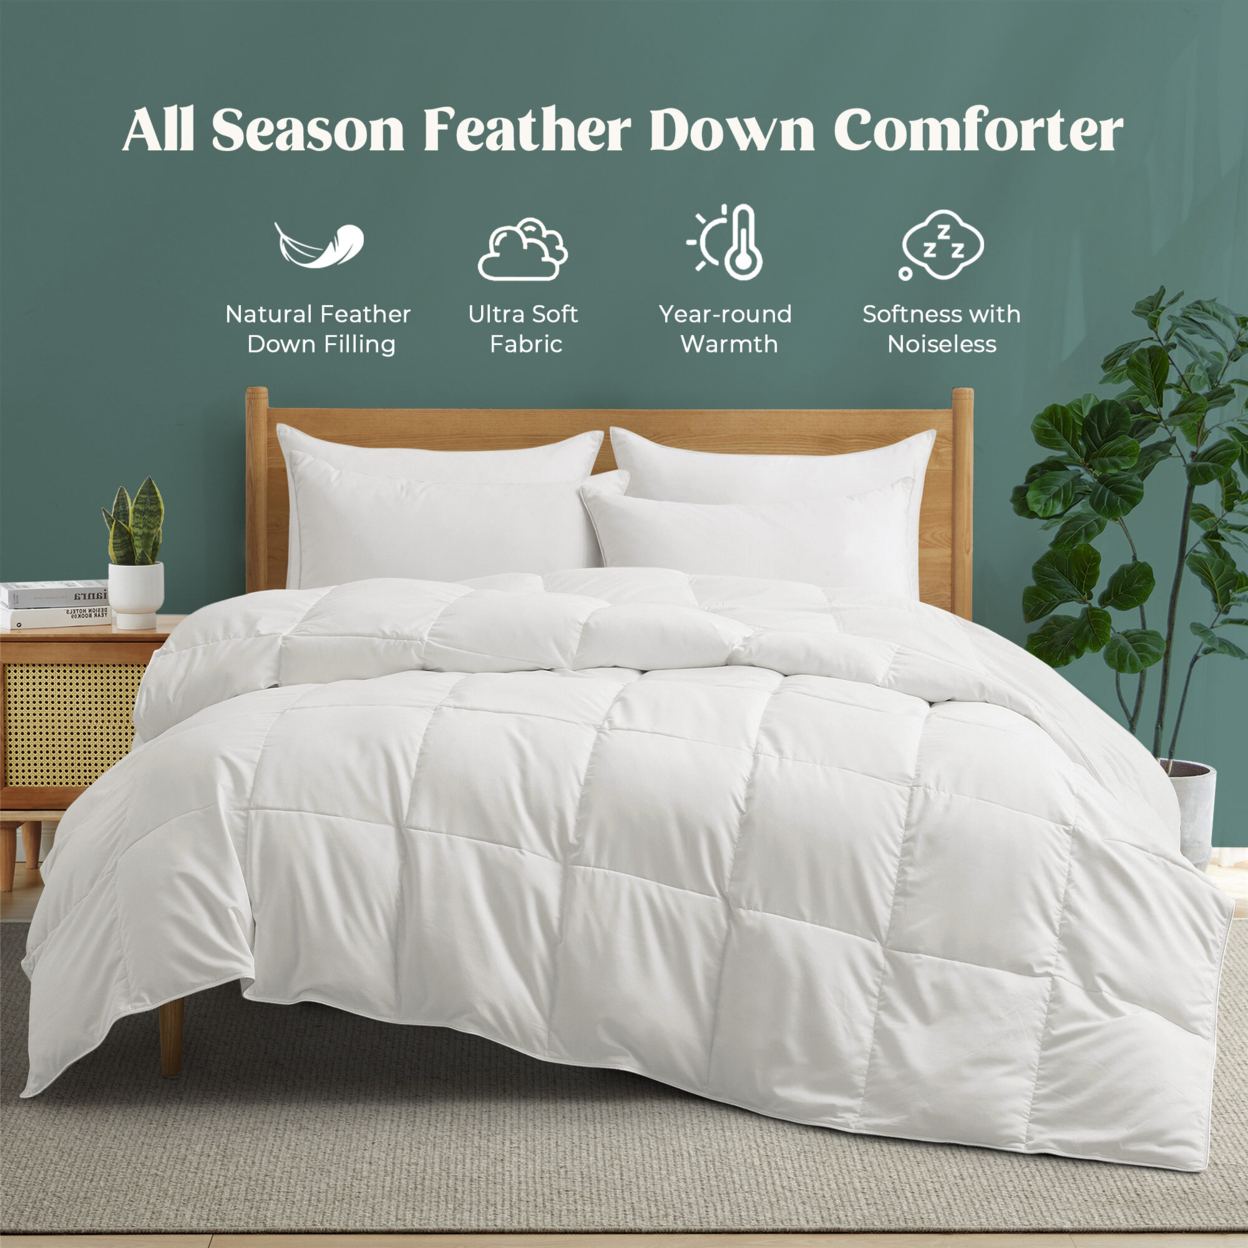 White Goose Feather Fiber And Down Comforter-Lightweight&Medium Weight, Sleep Soundly With Noiseless - Medium Weight, California King